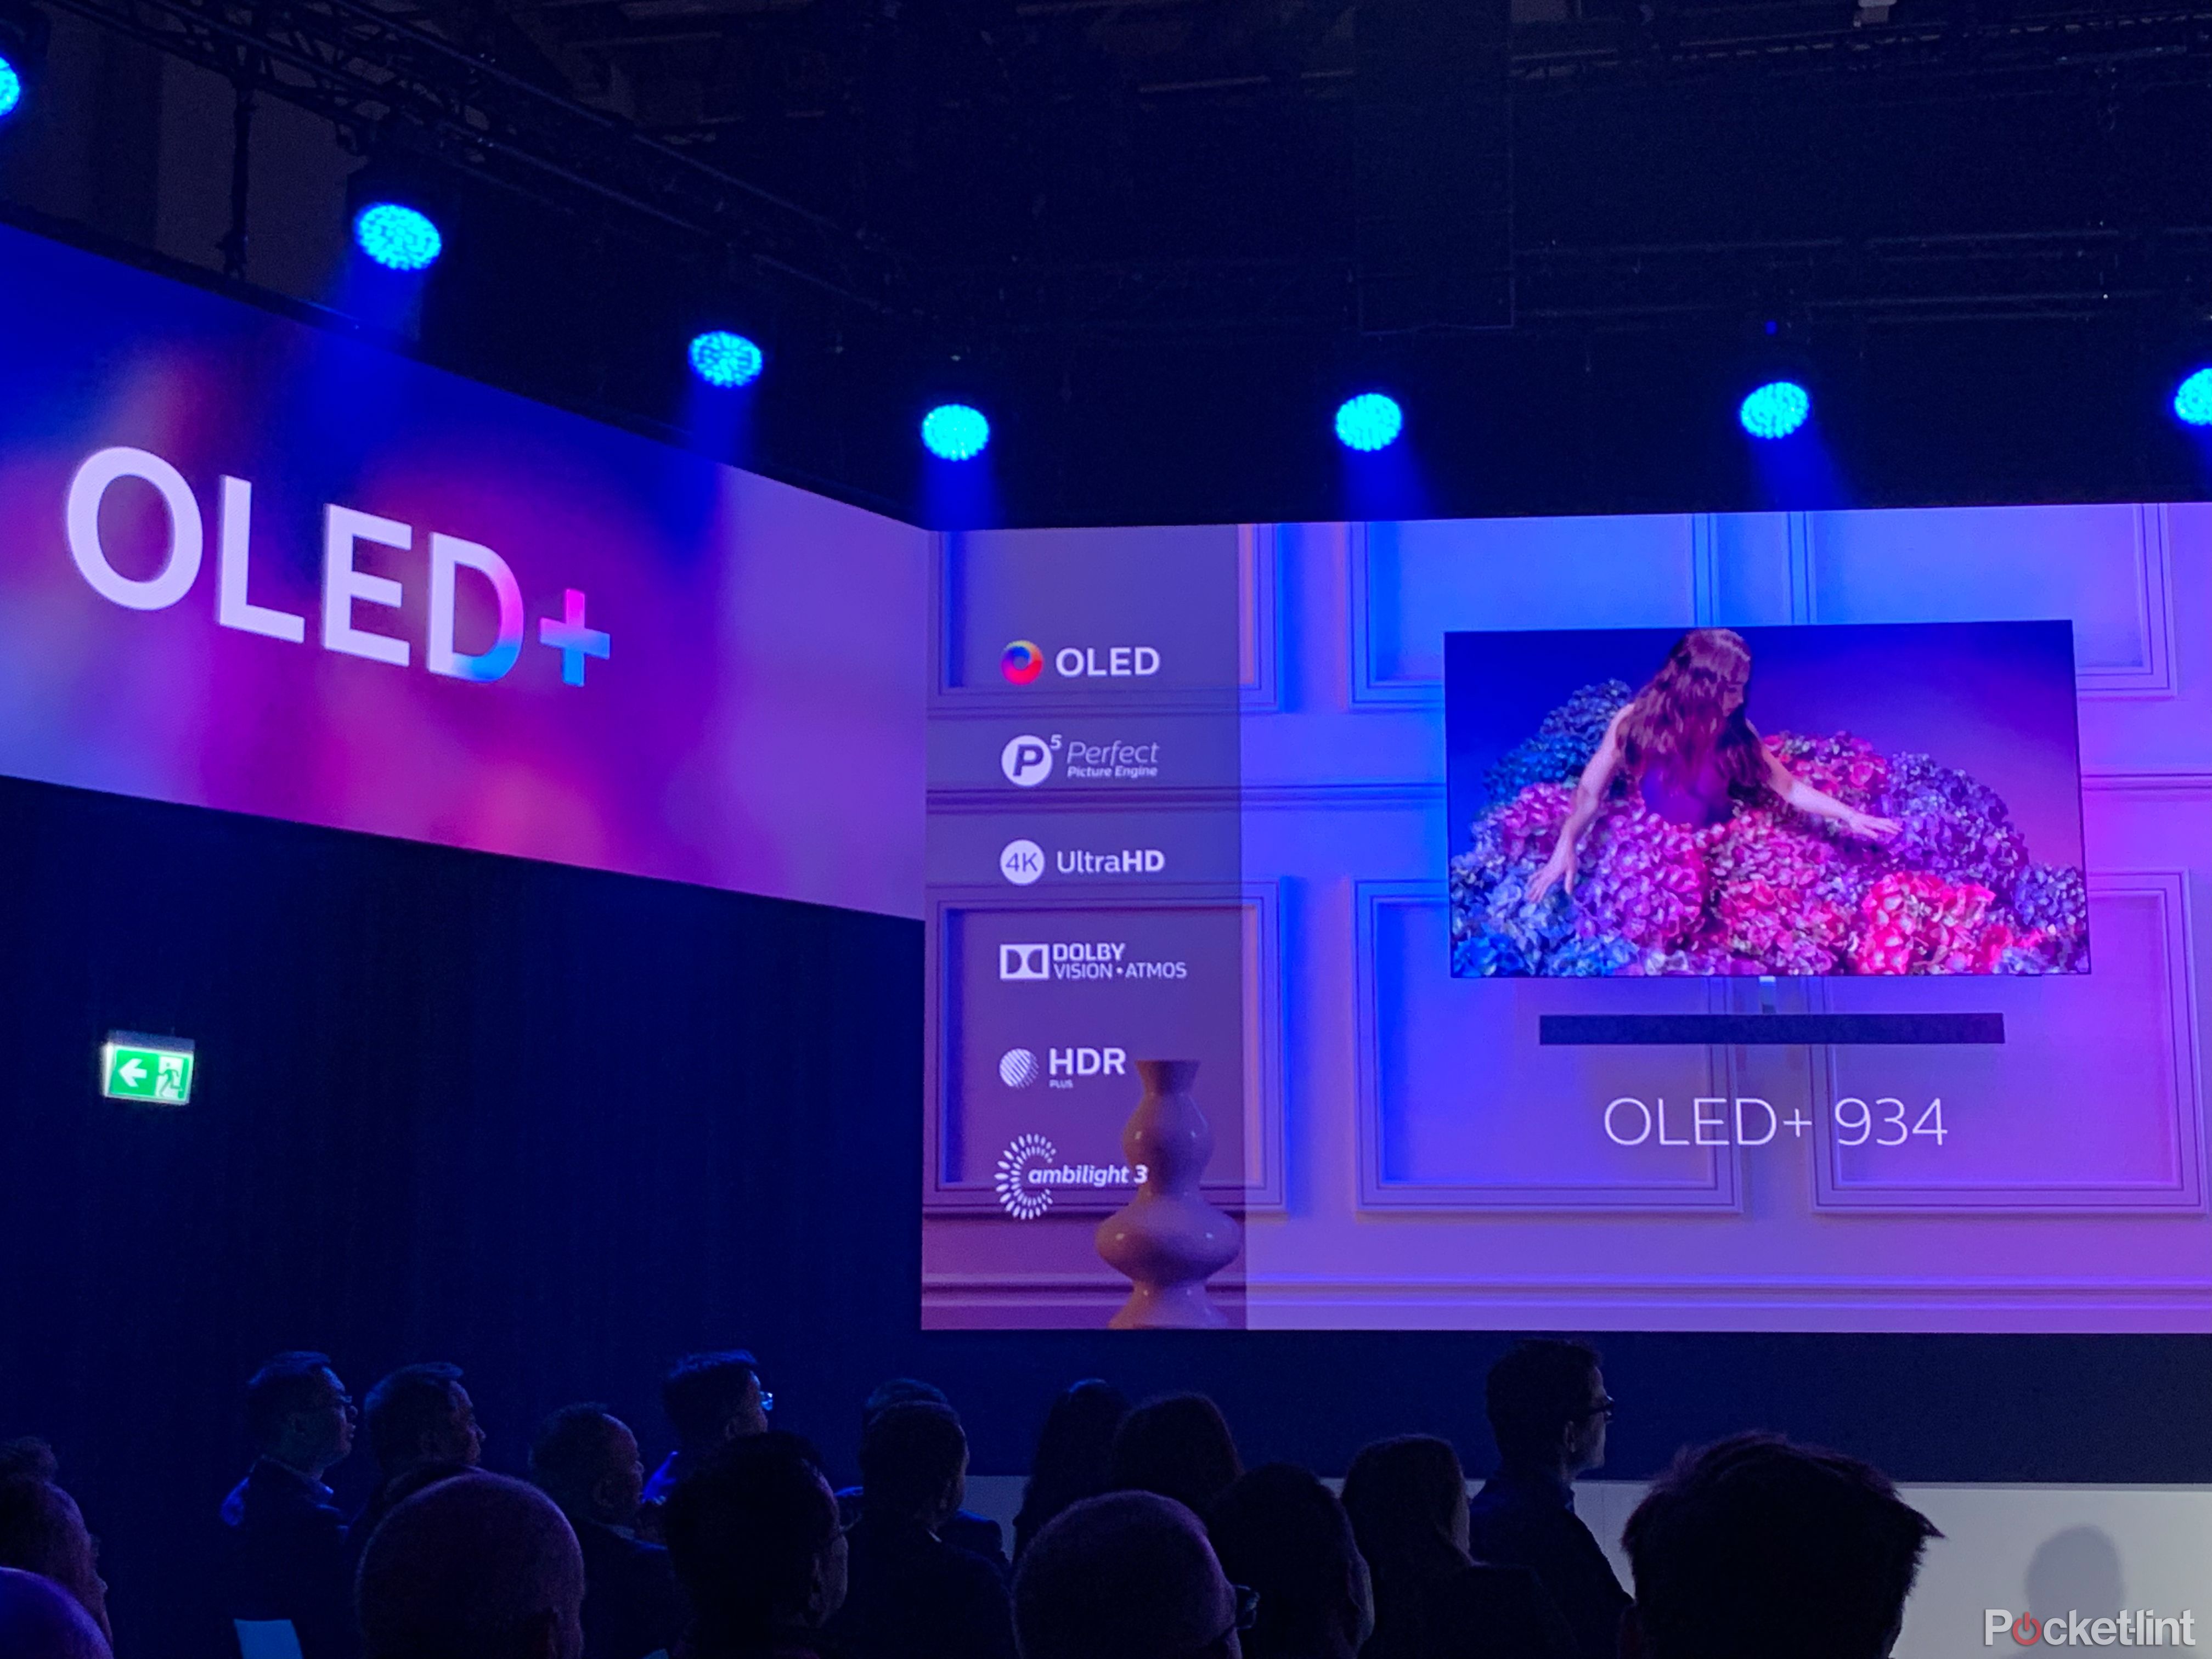 Philips Reveals Tow New Oled Tvs With Third-generation P5 Picture Processor image 2